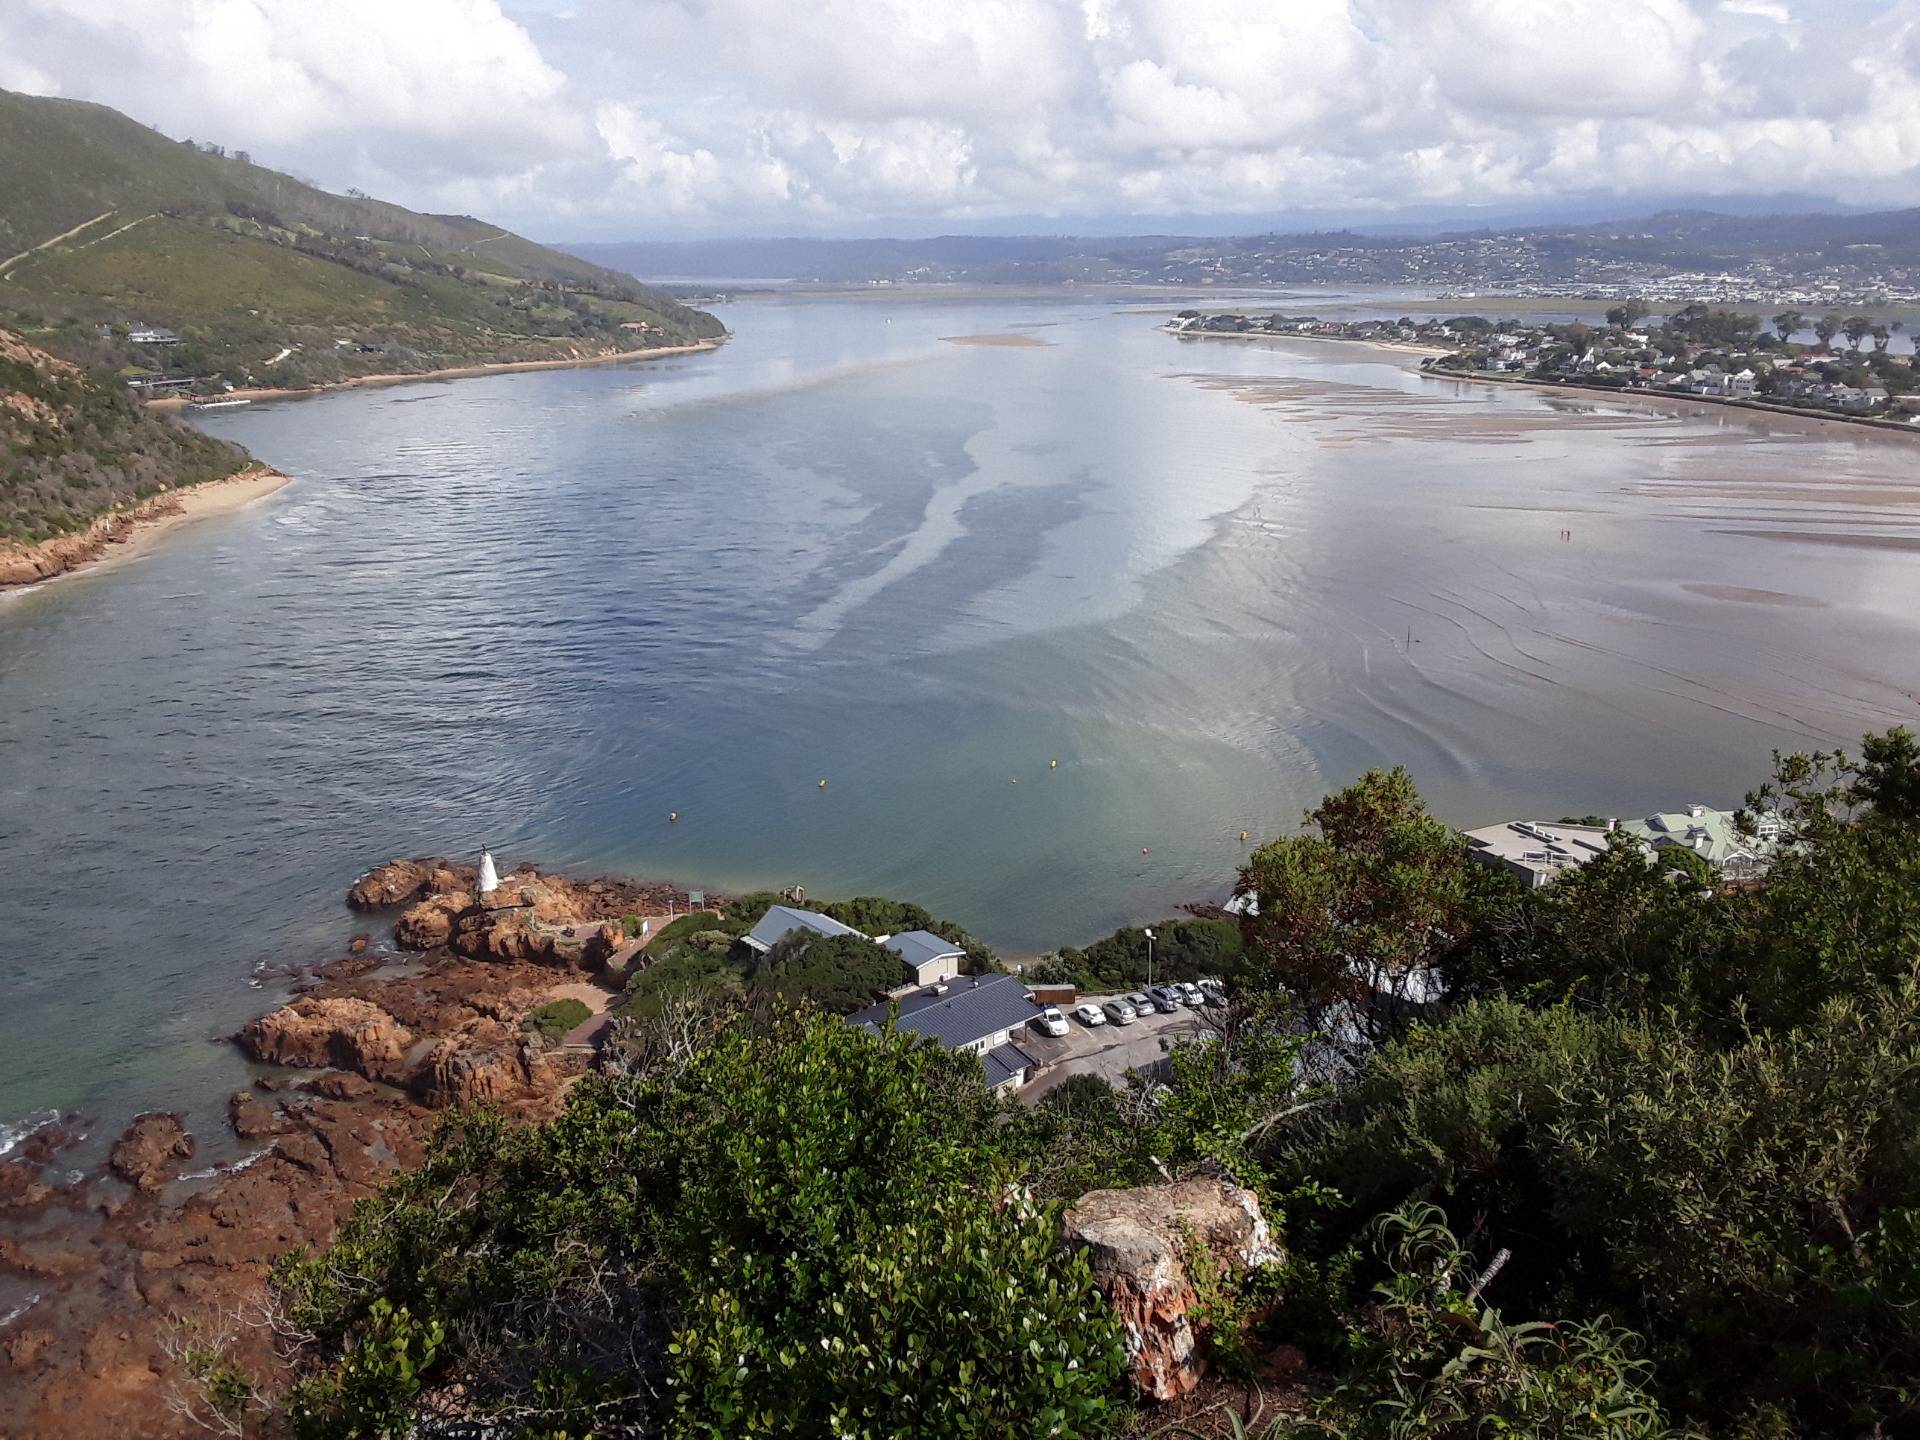 Knysna estuary with access from the ocean on the left and town in the background to the right